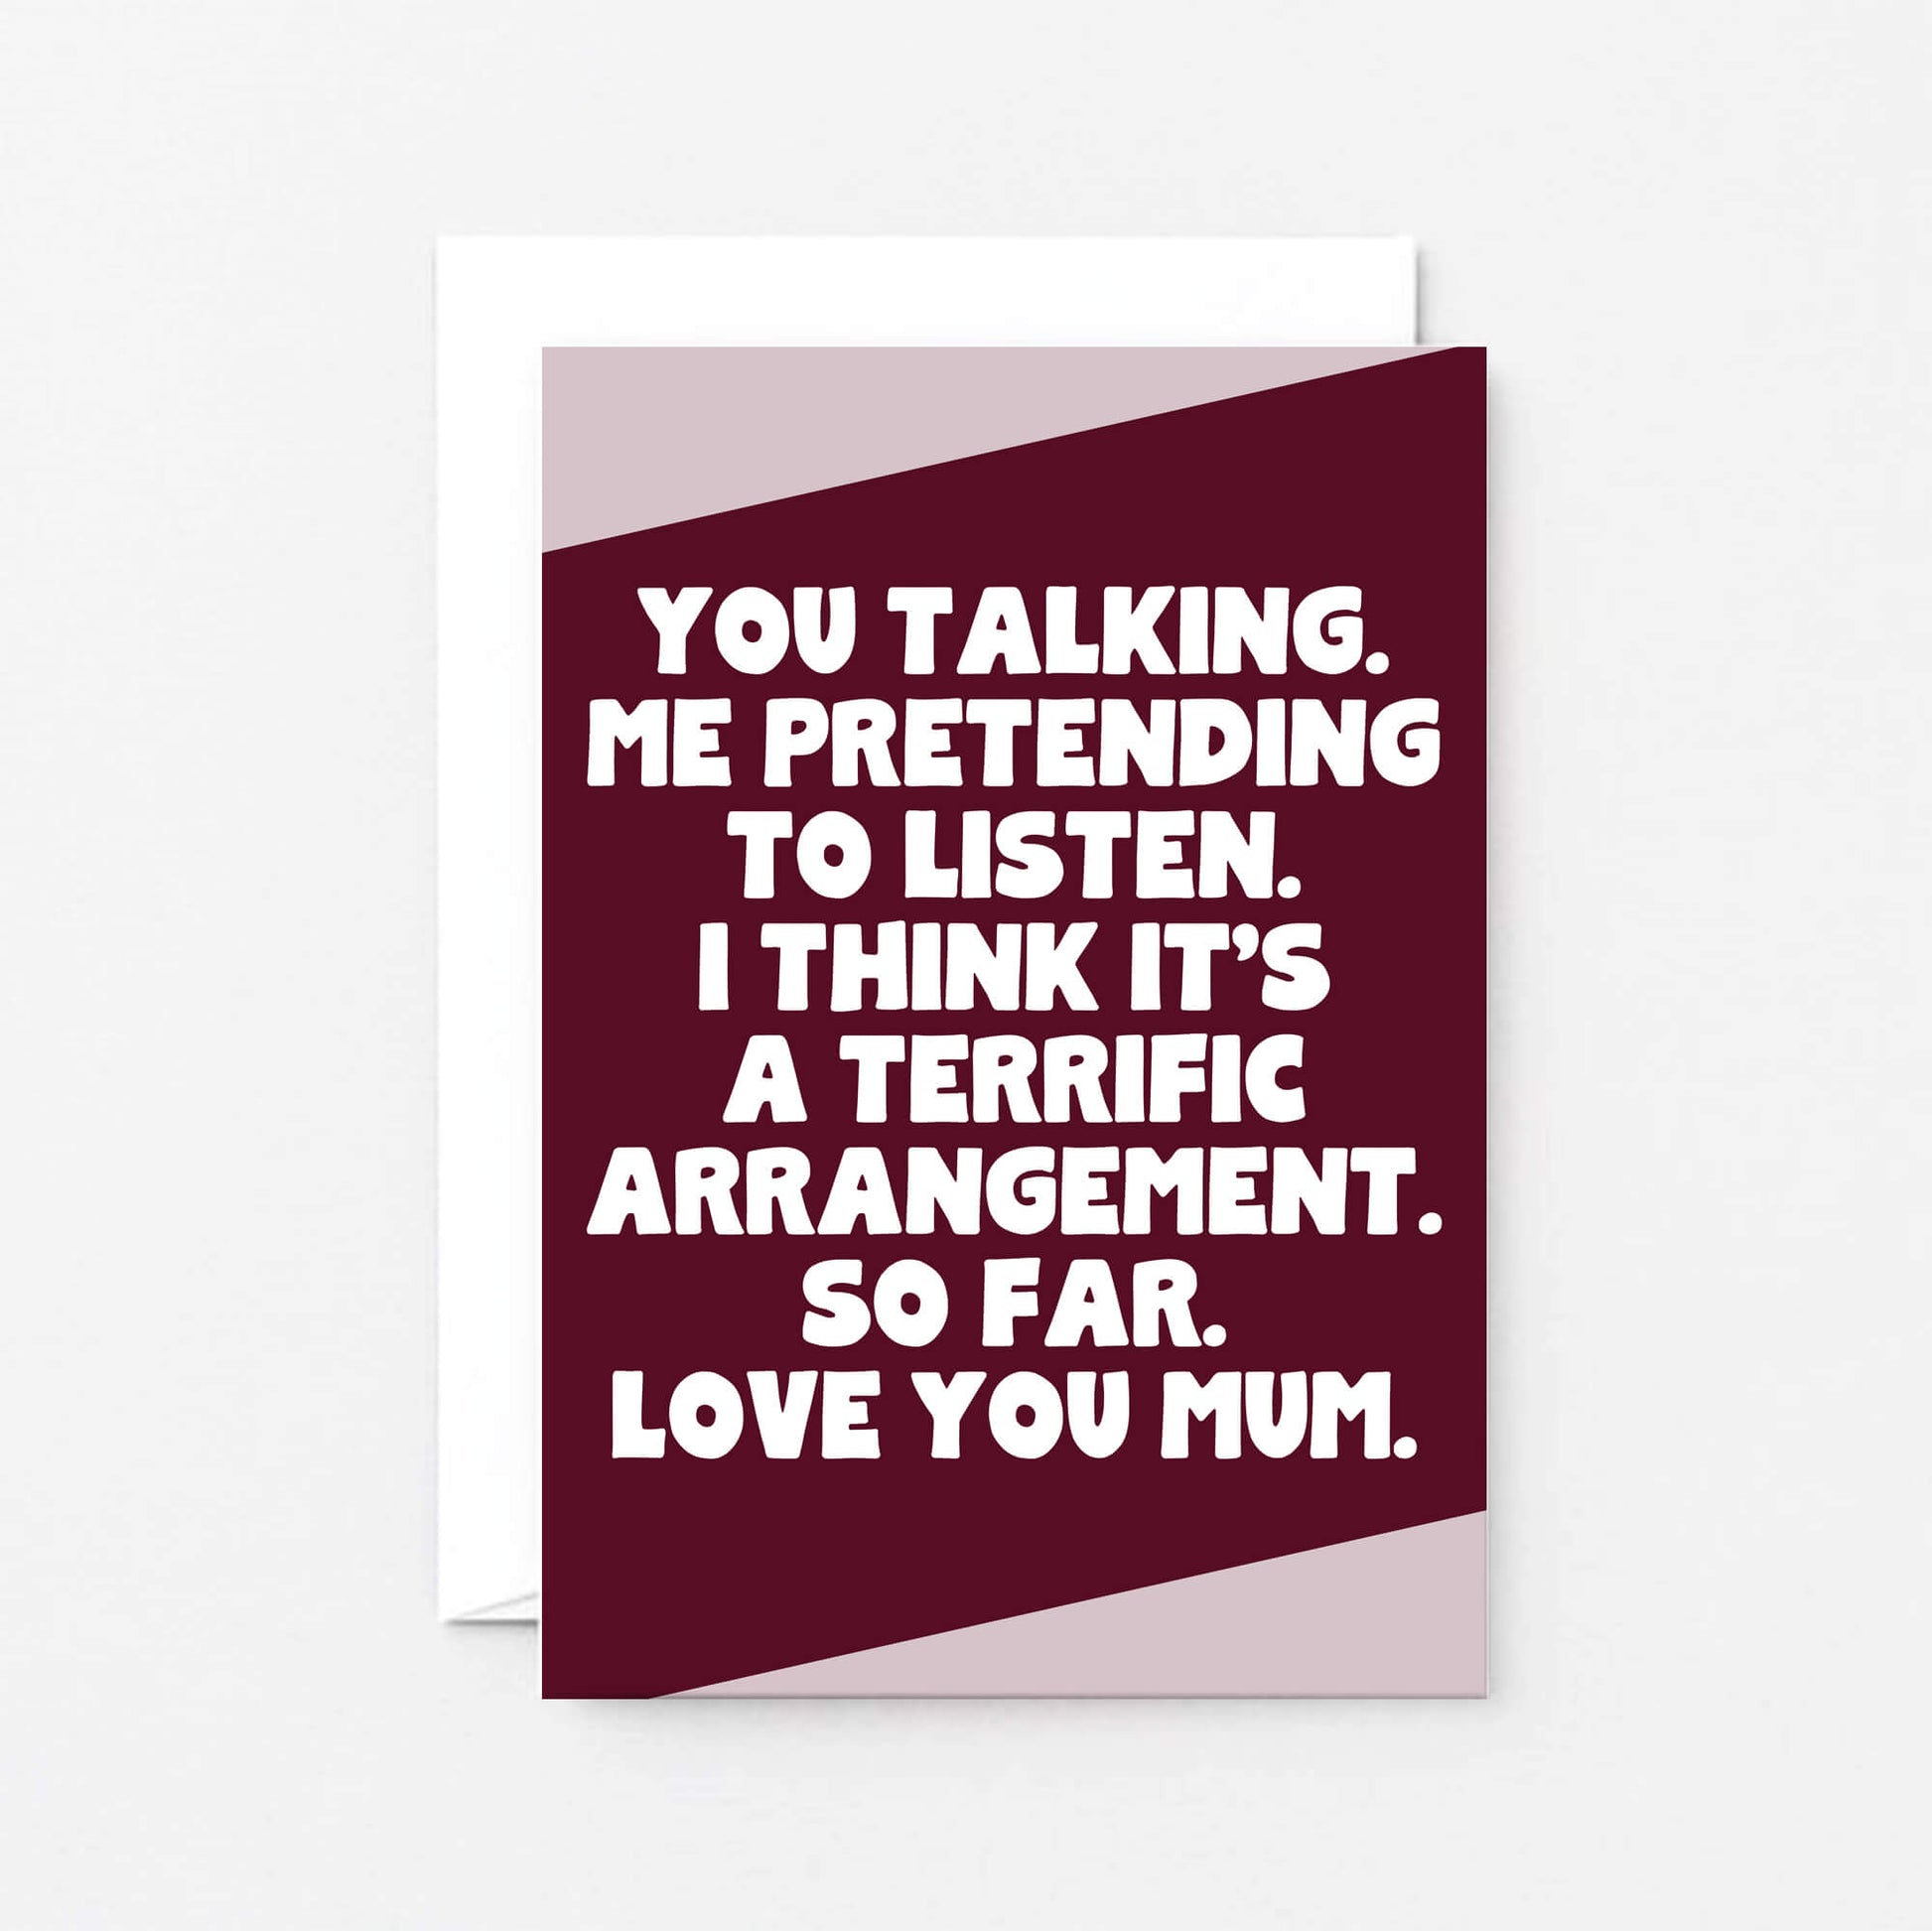 Mum Card. Reads You talking. Me pretending to listen. I think it's a terrific arrangement. So far. Love you mum. Card is designed by SixElevenCreations. Product Code SE3082A6